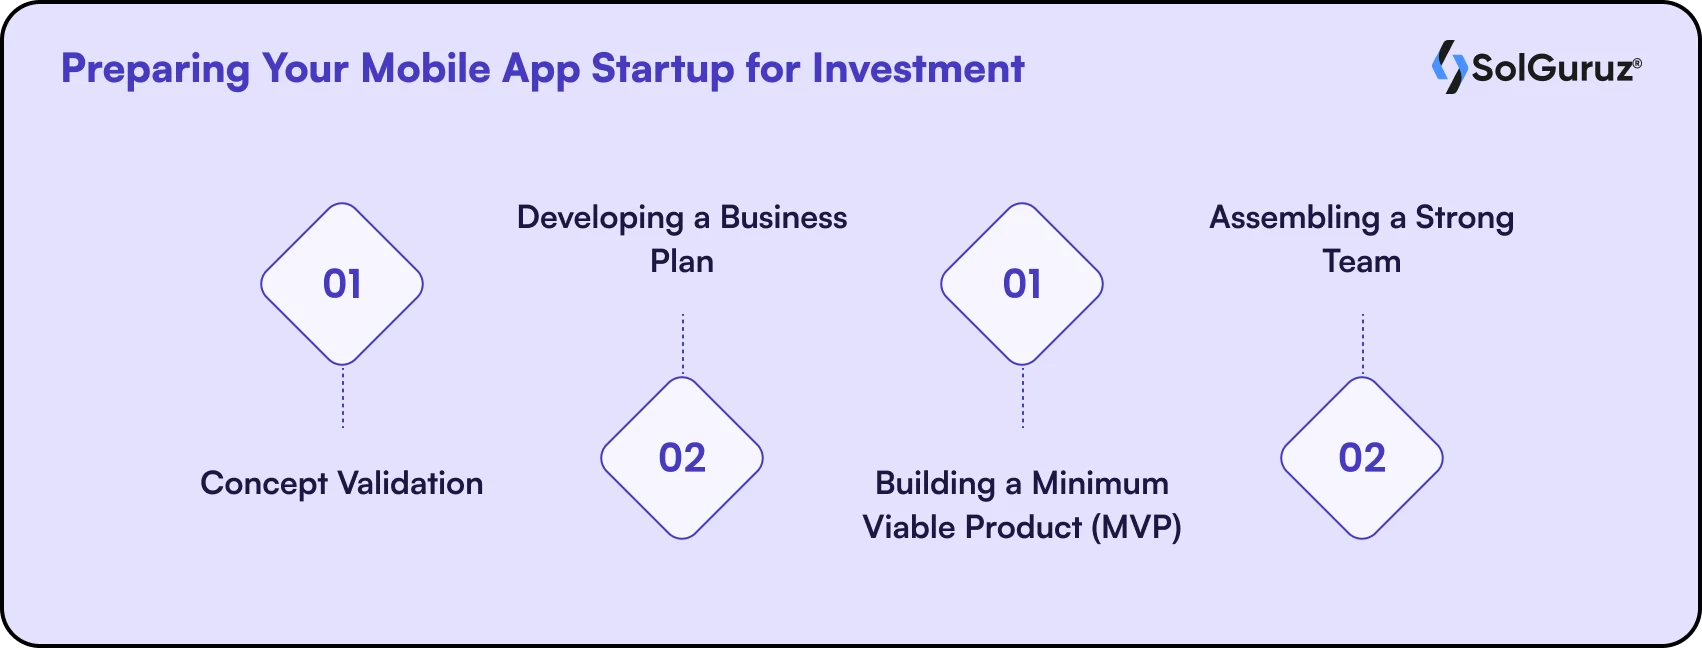 Preparing Your Mobile App Startup for Investment